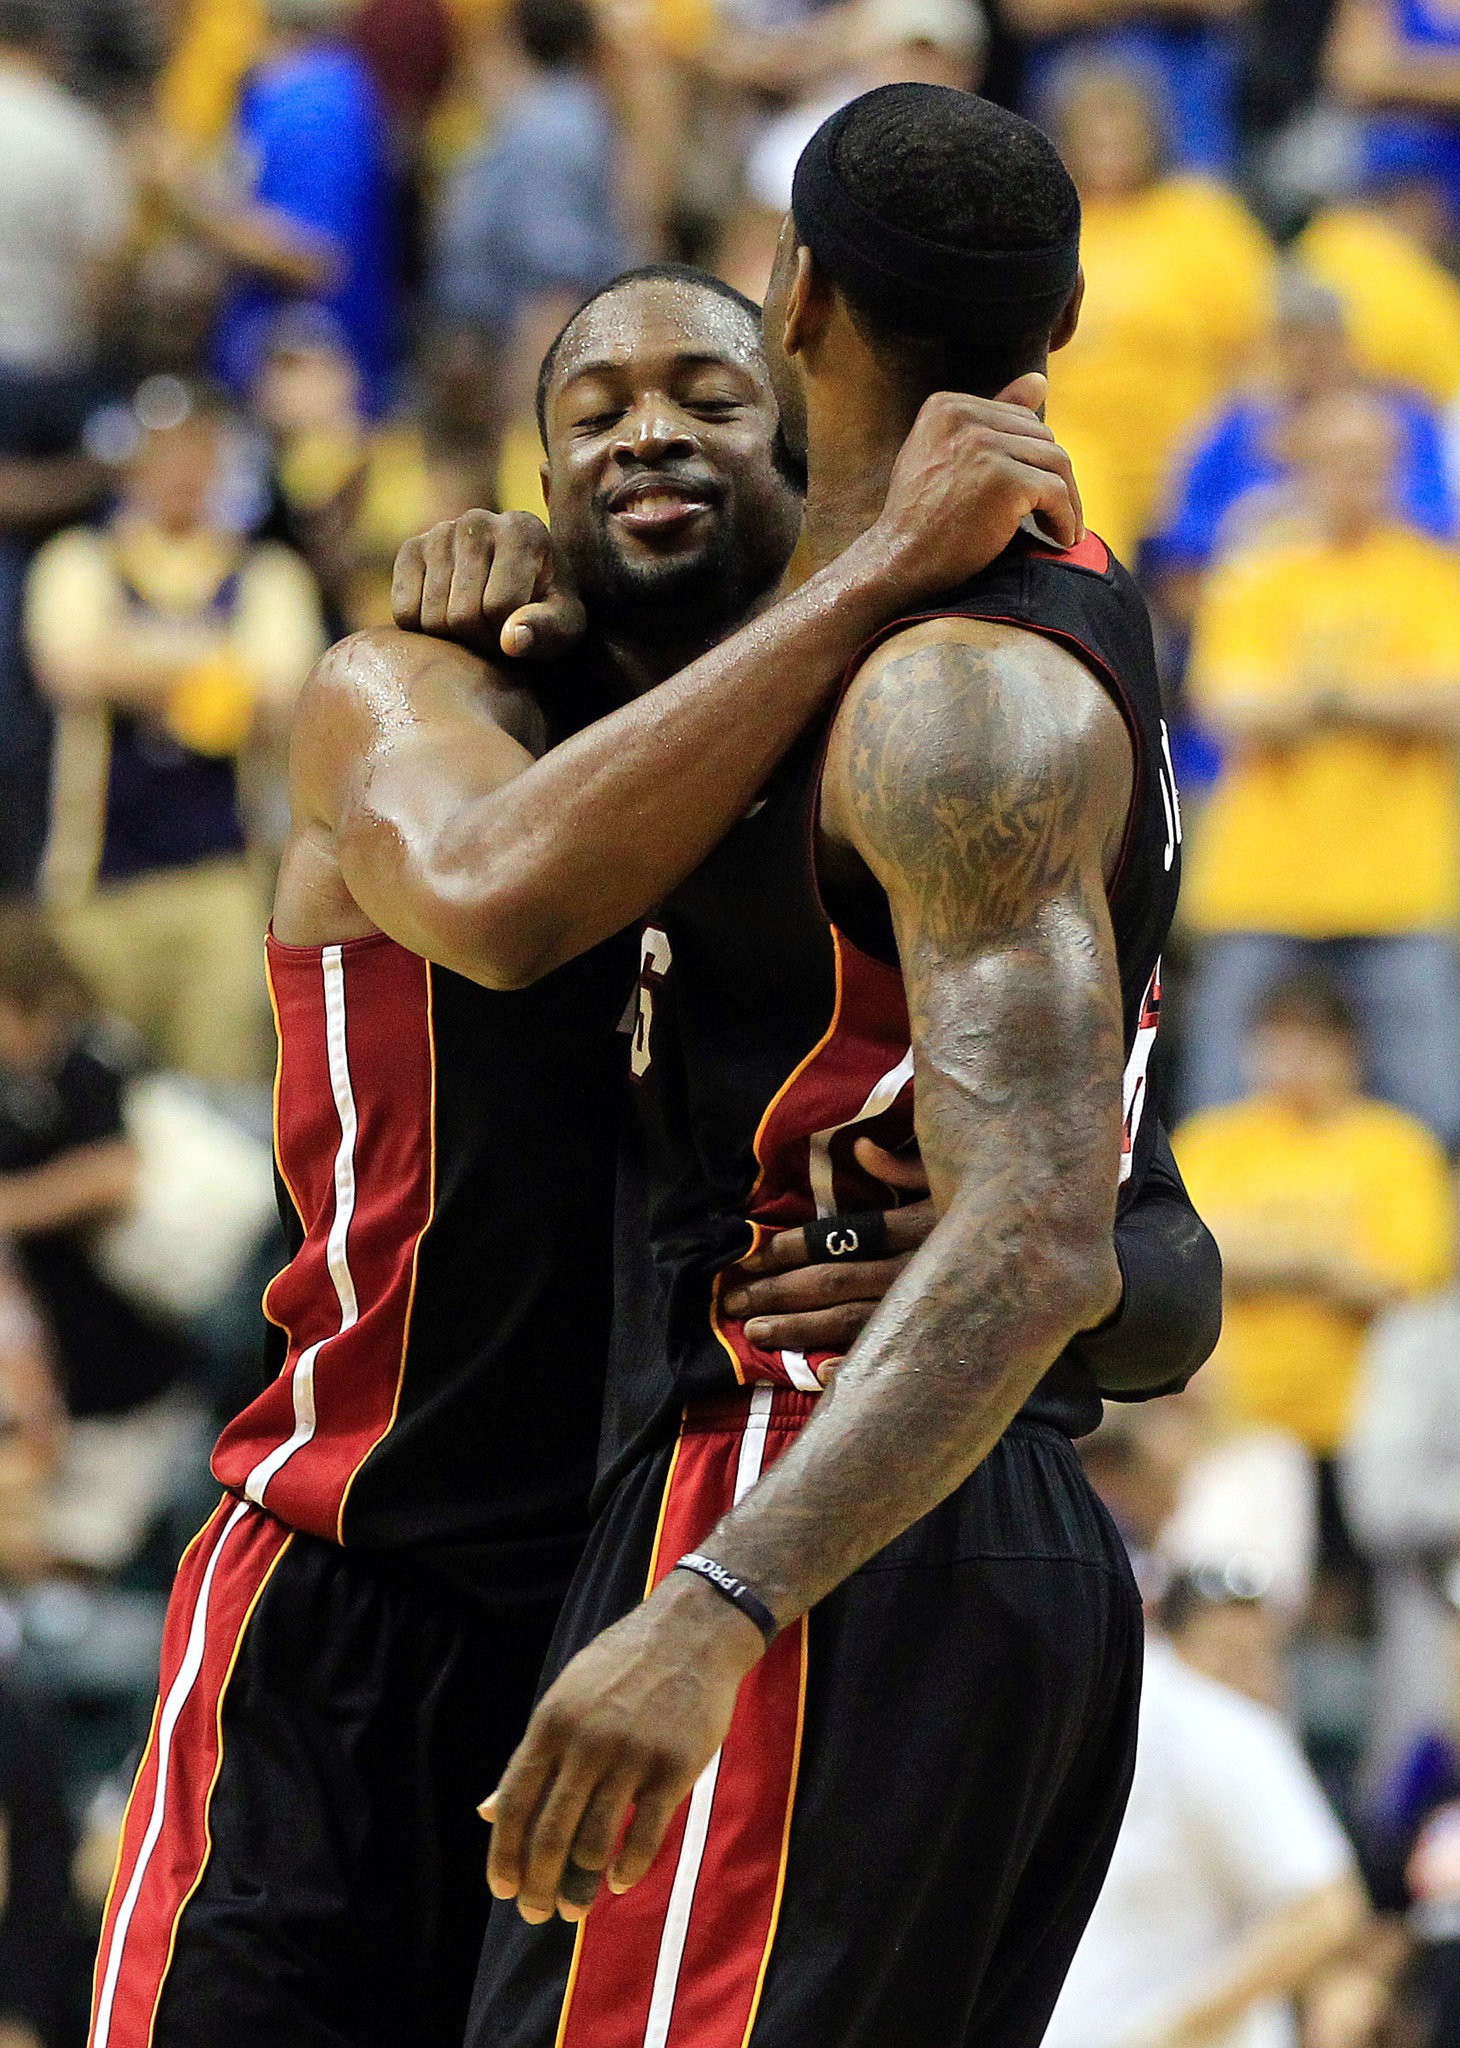 'Unbelievable' - LeBron James flatly refused Dwayne Wade' invitation to join Miami Heat